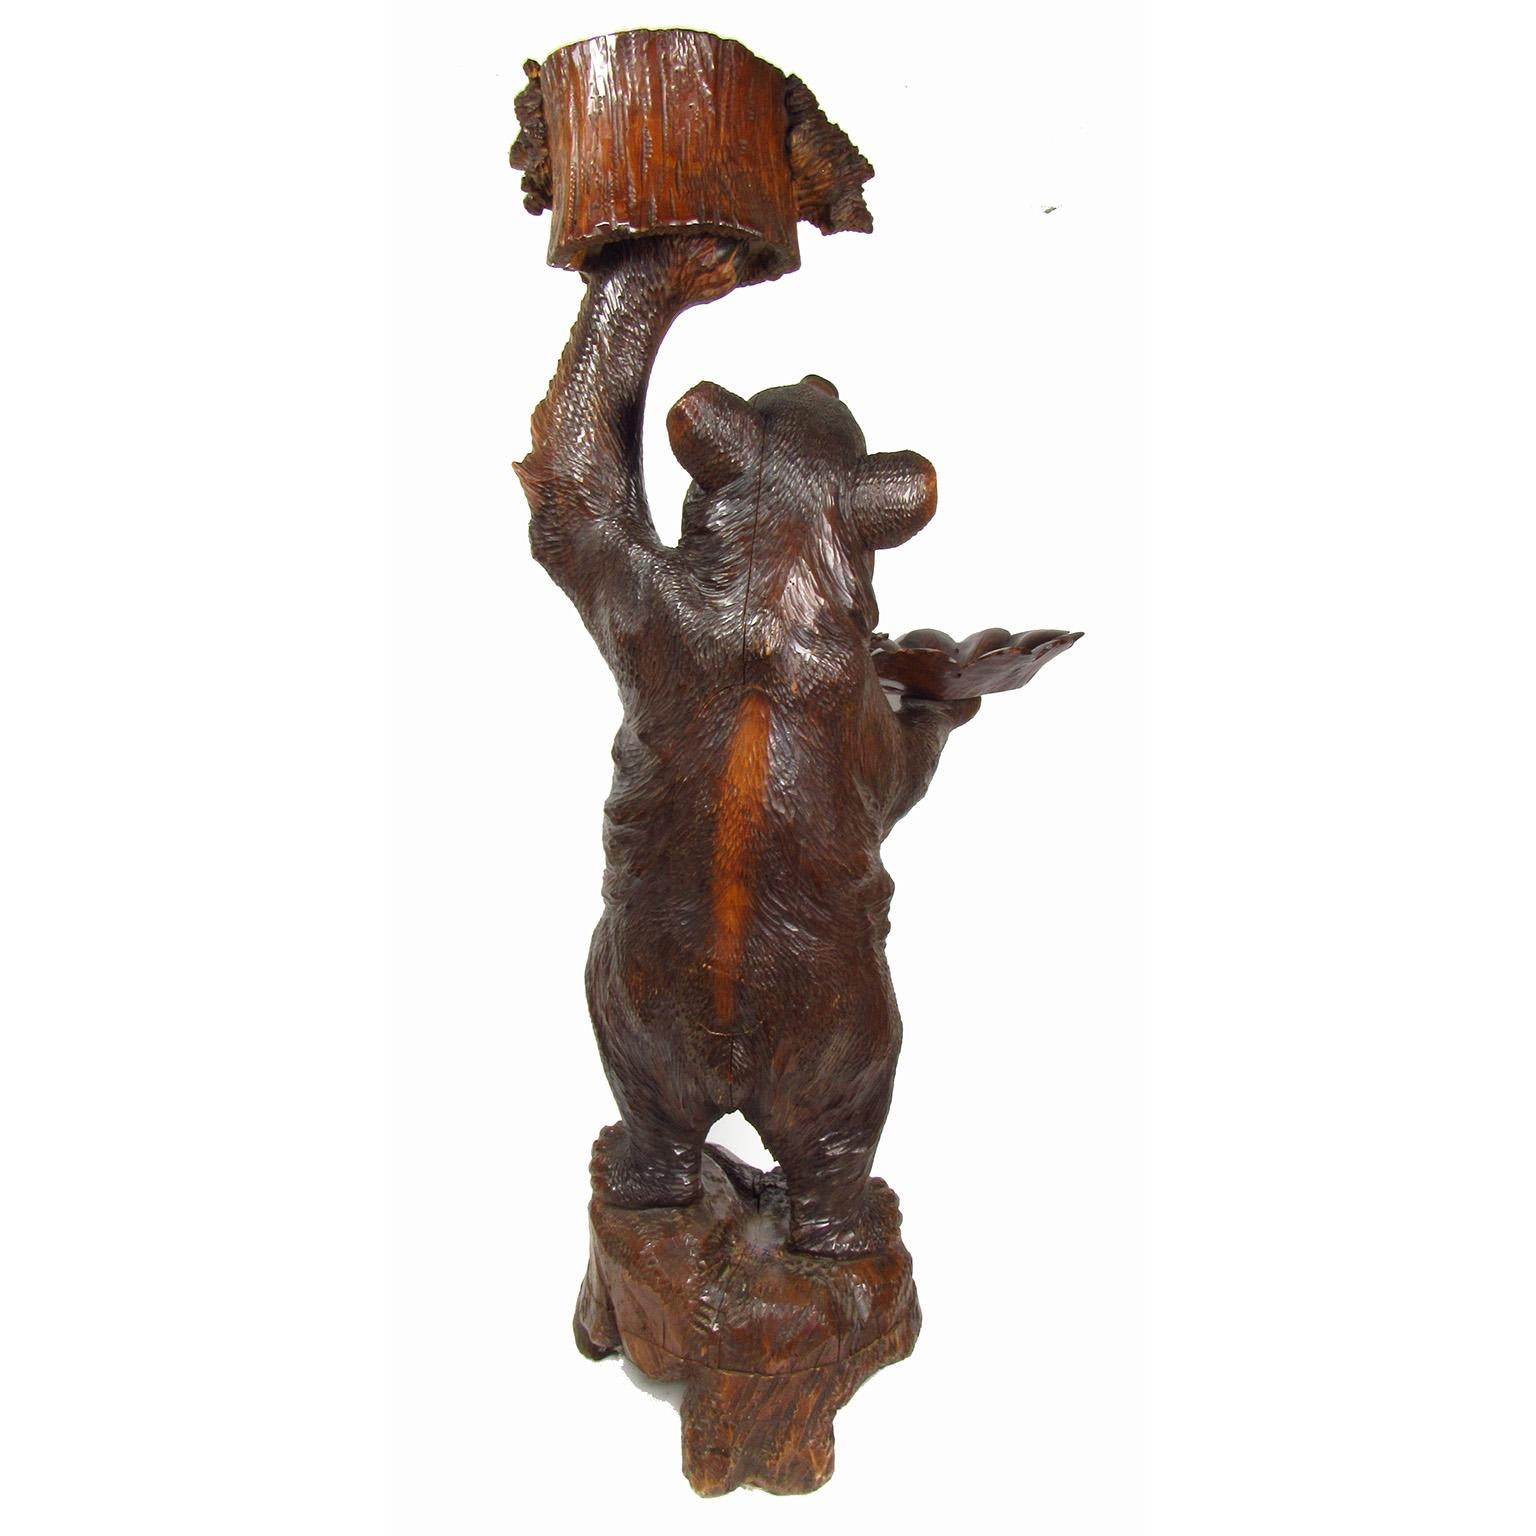 Antique Black Forest bear form carved walnut dumbwaiter, late 19th-early 20th century. Great patina. Interior of the mouth and claws polychromed, glass eyes. Measures: Height 41 1/4 inches, width 18 inches, depth 20 inches.
 